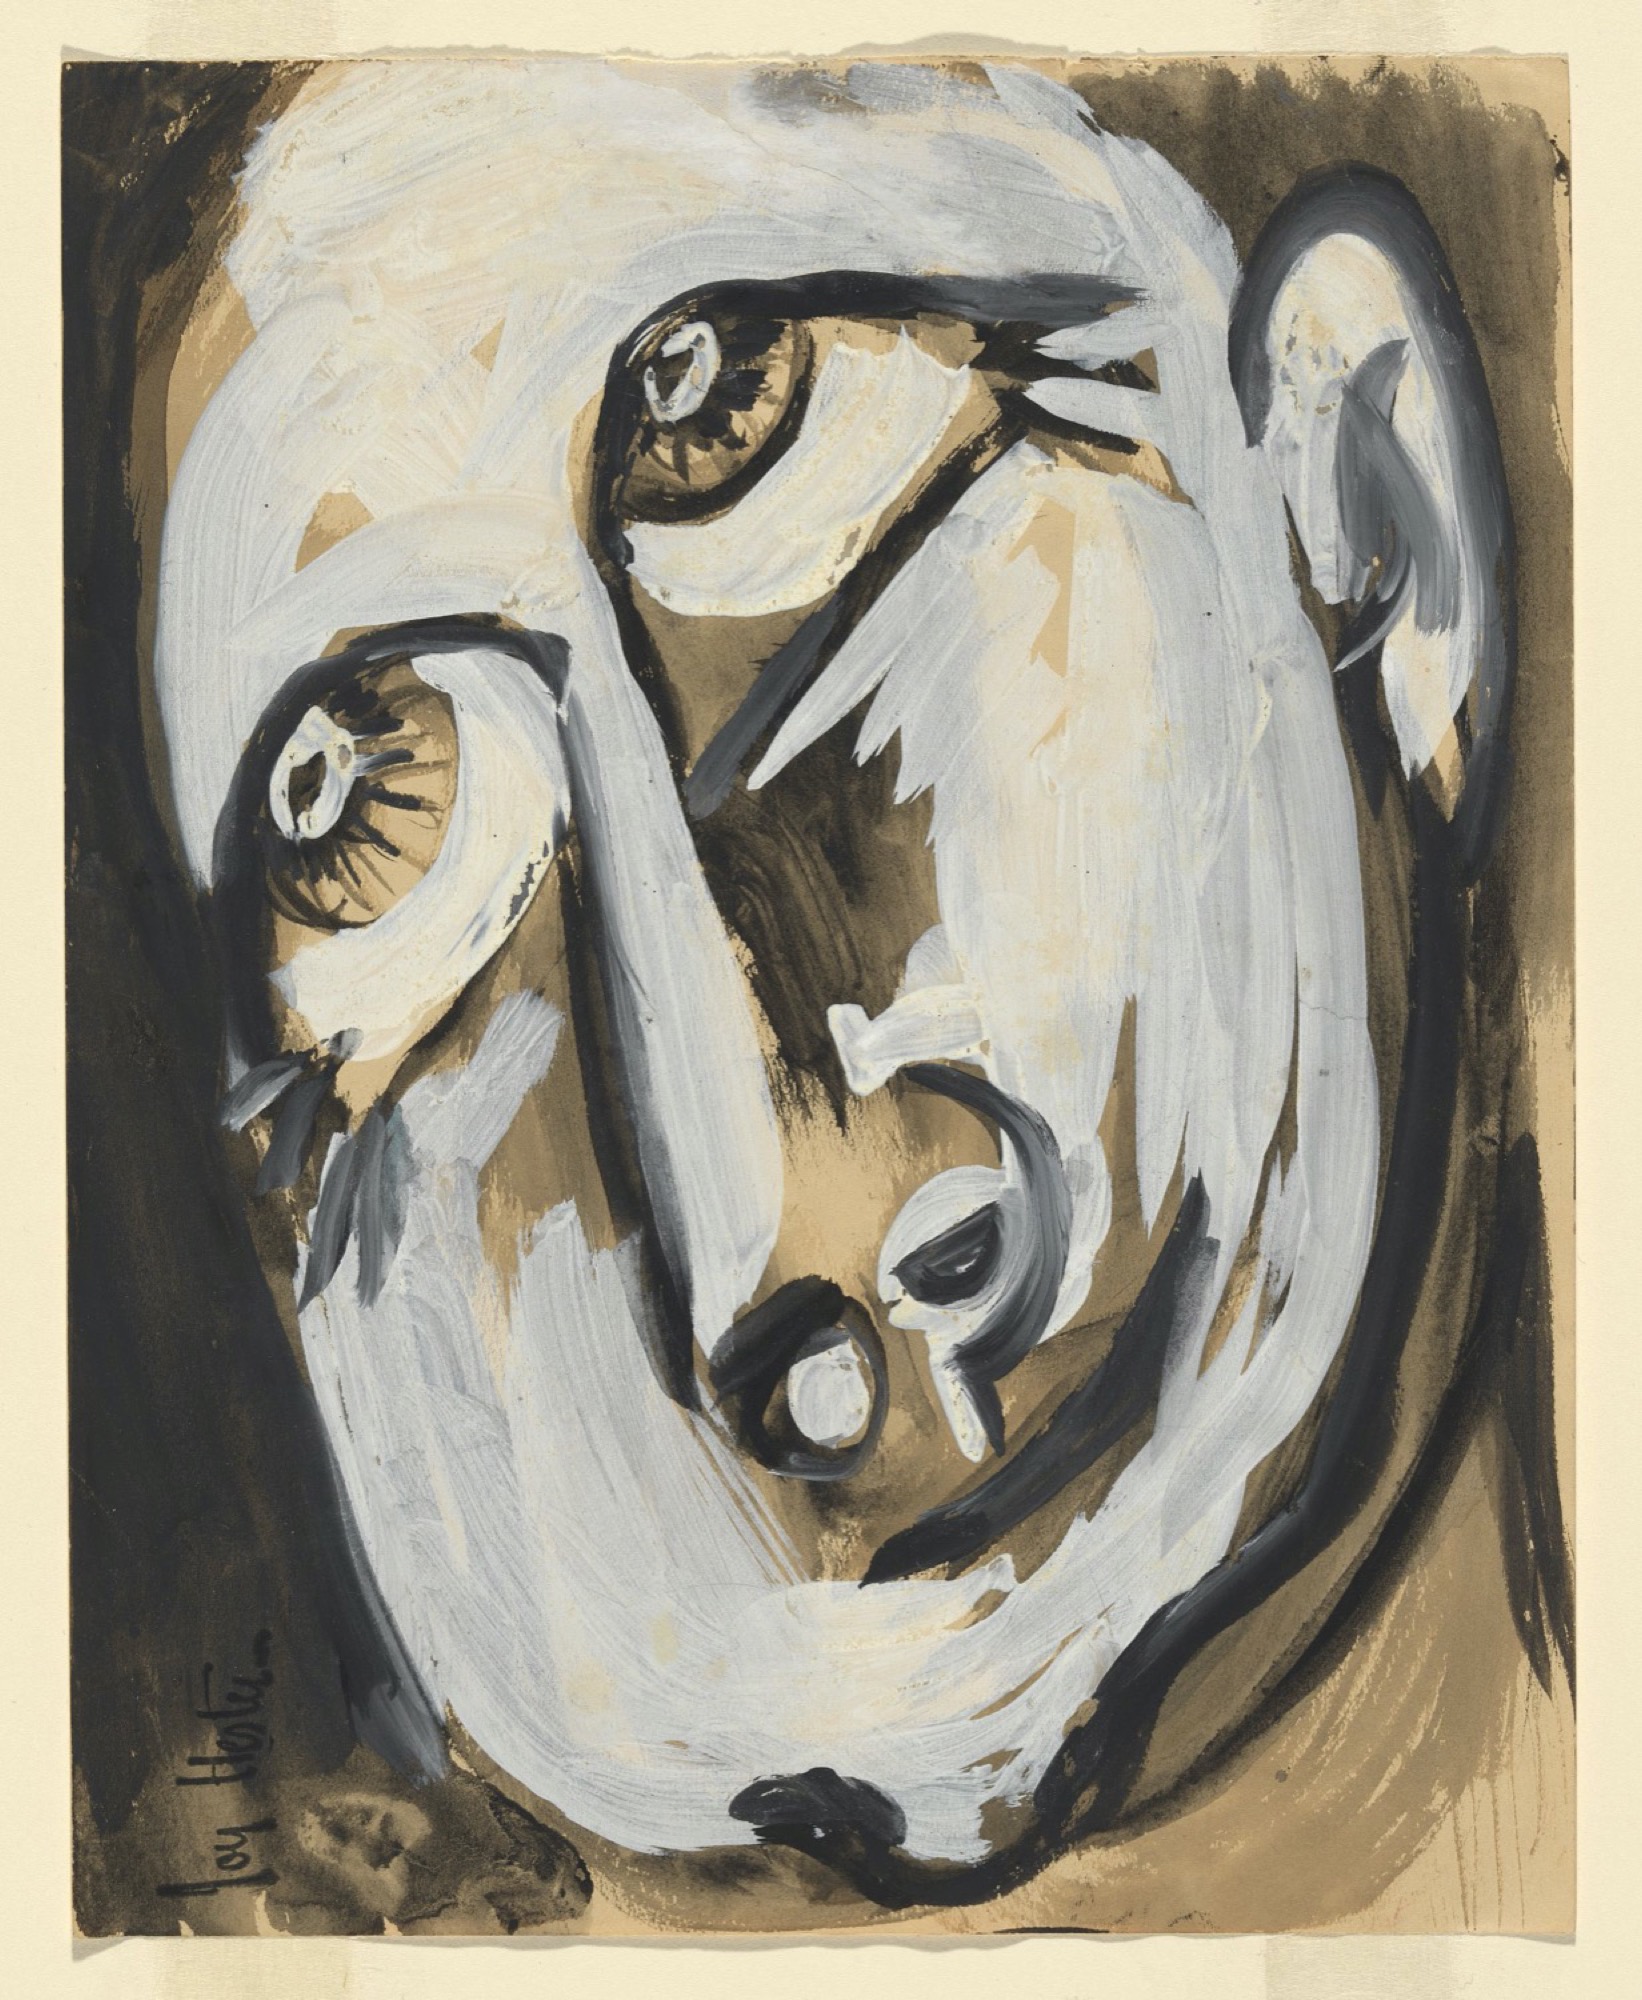 Joy Hester, <em>Gethsemane III</em>, c.1947, drawing in brush and ink and gouache, 24.8 x 31.0 cm (sheet). Collection: National Gallery of Australia, Canberra.